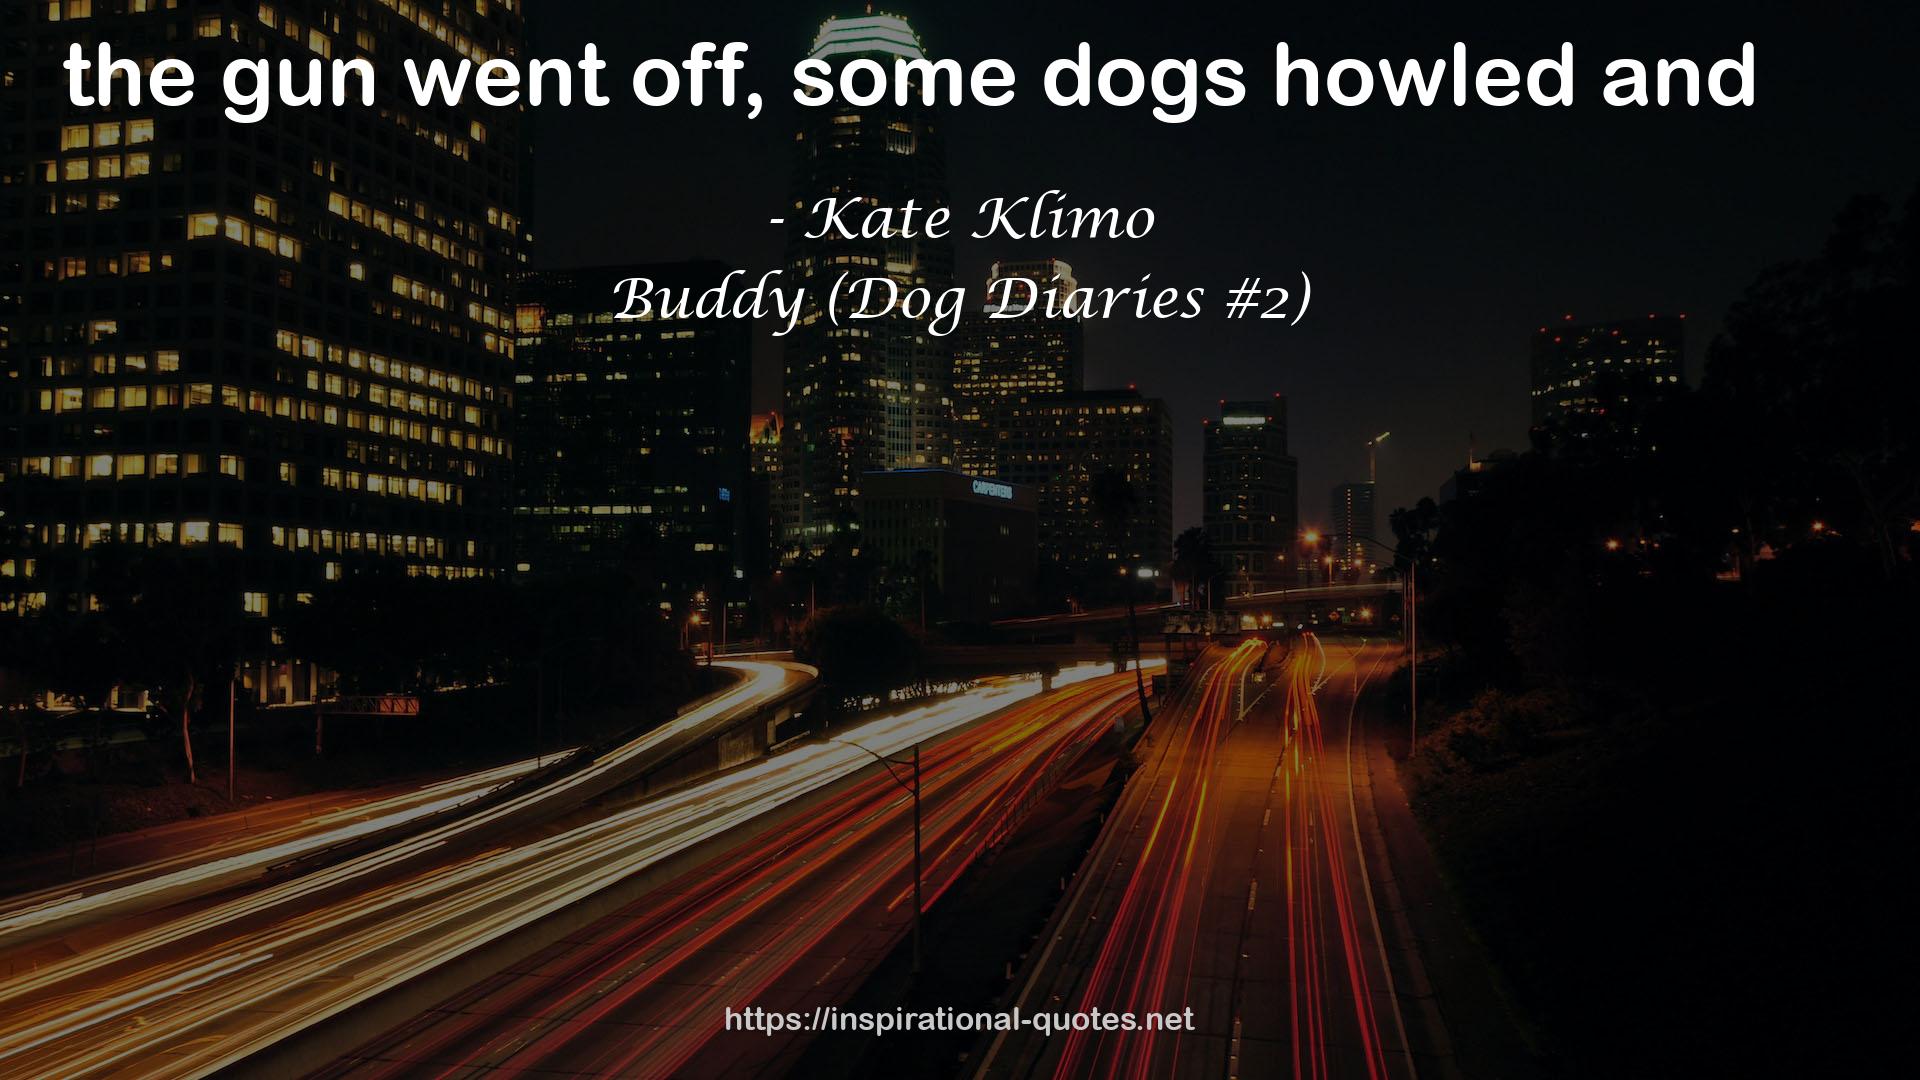 Buddy (Dog Diaries #2) QUOTES